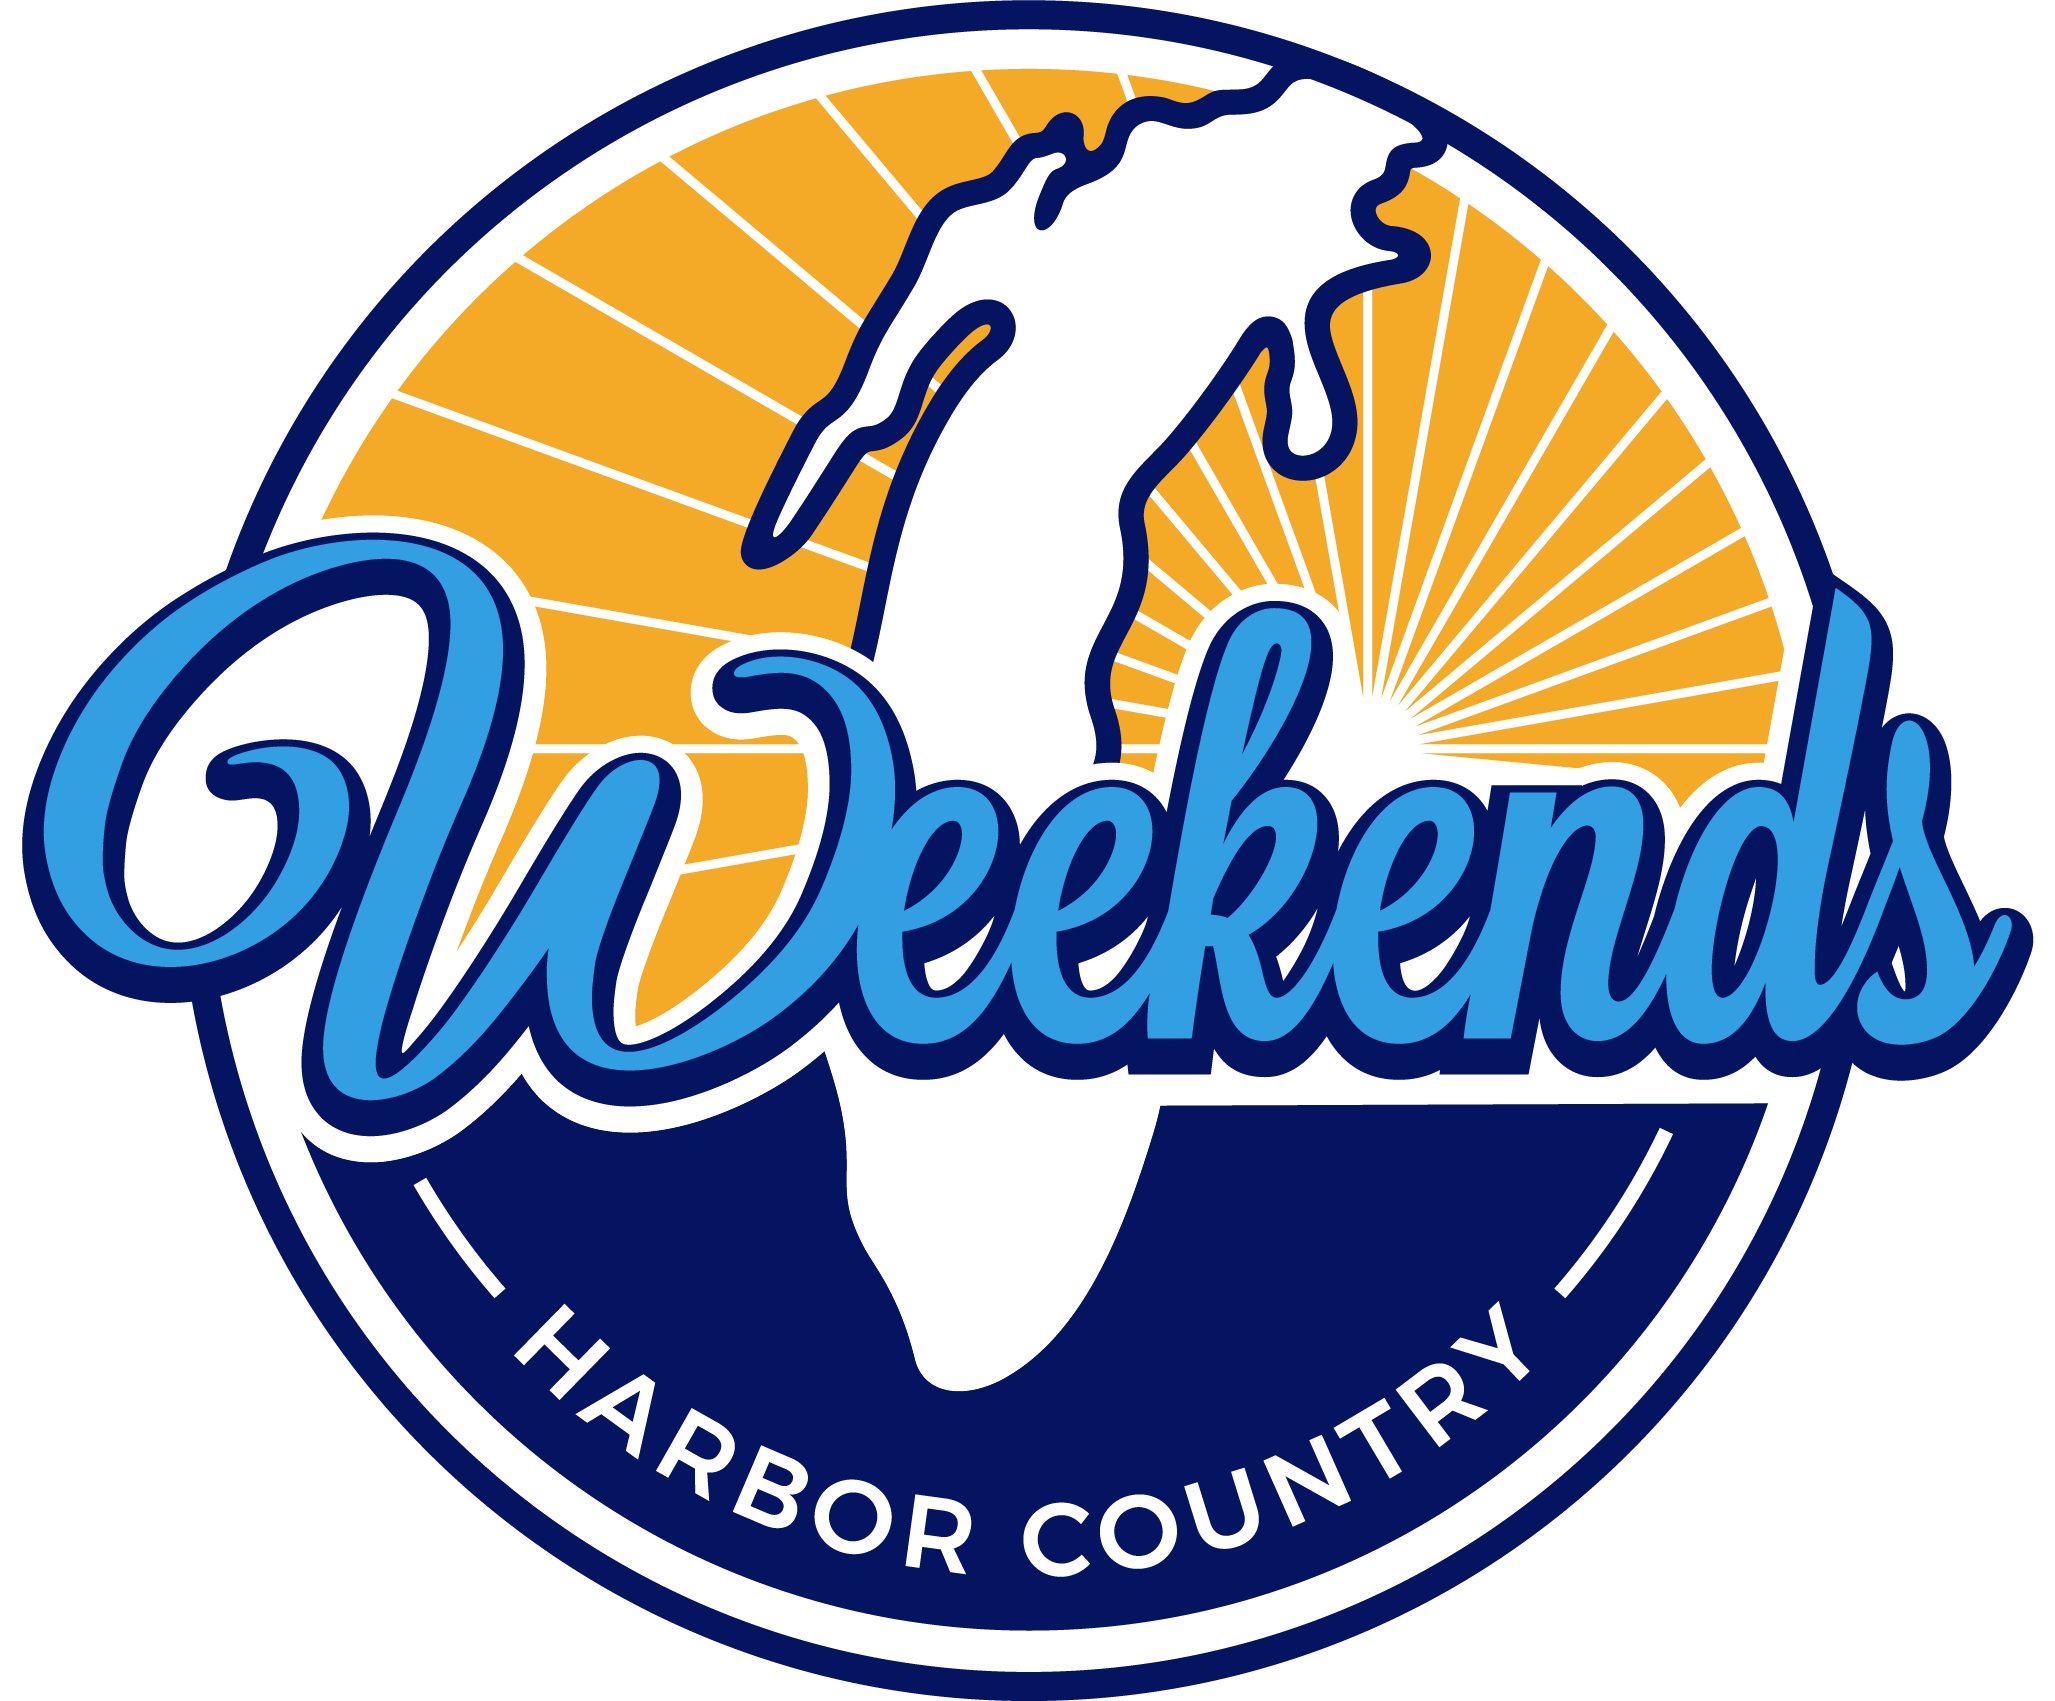 Weekends Harbor Country